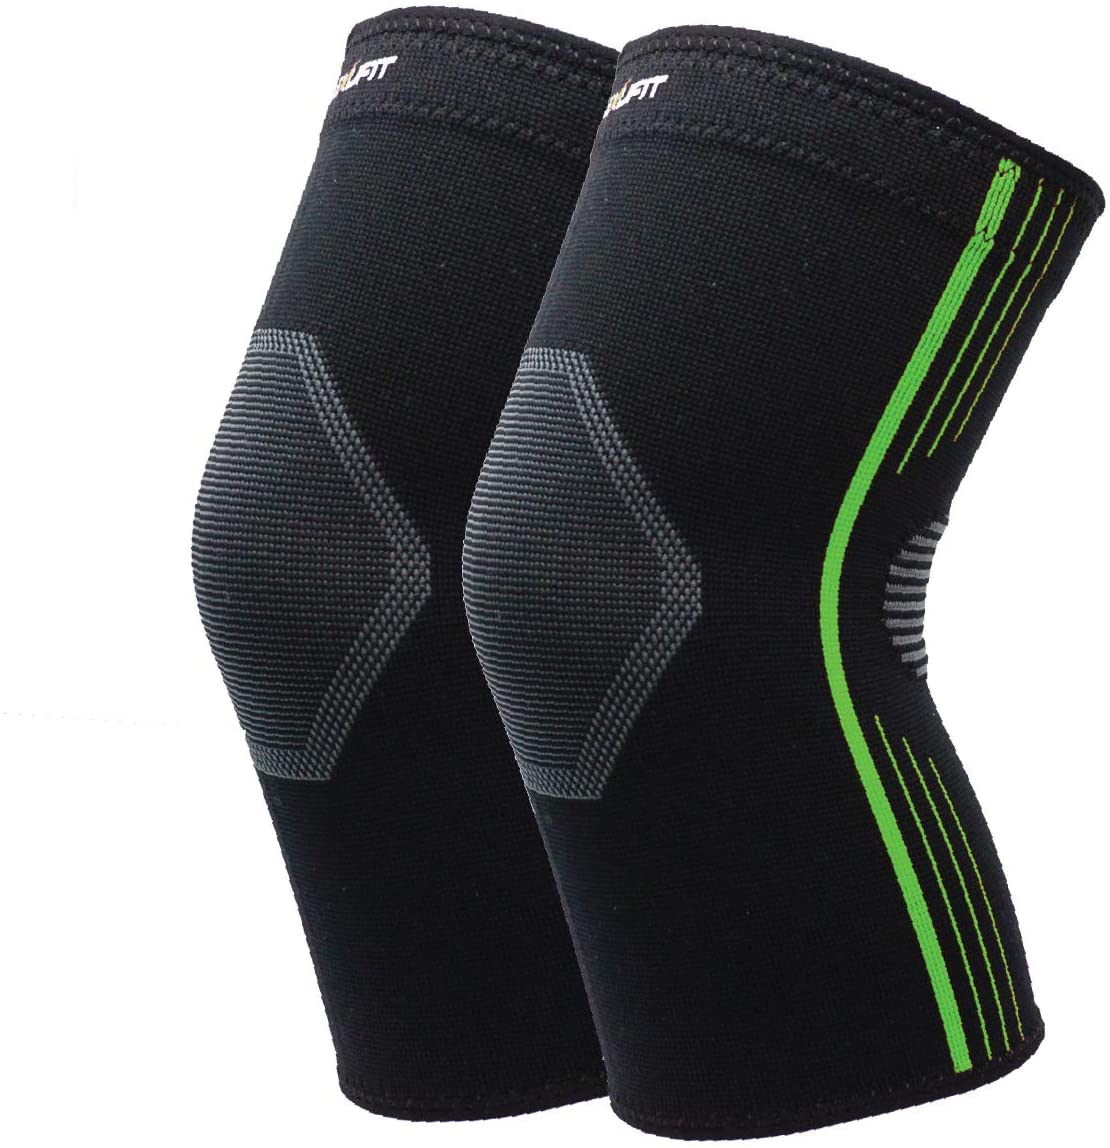 NeoAlly® High Compression Knee Sleeves